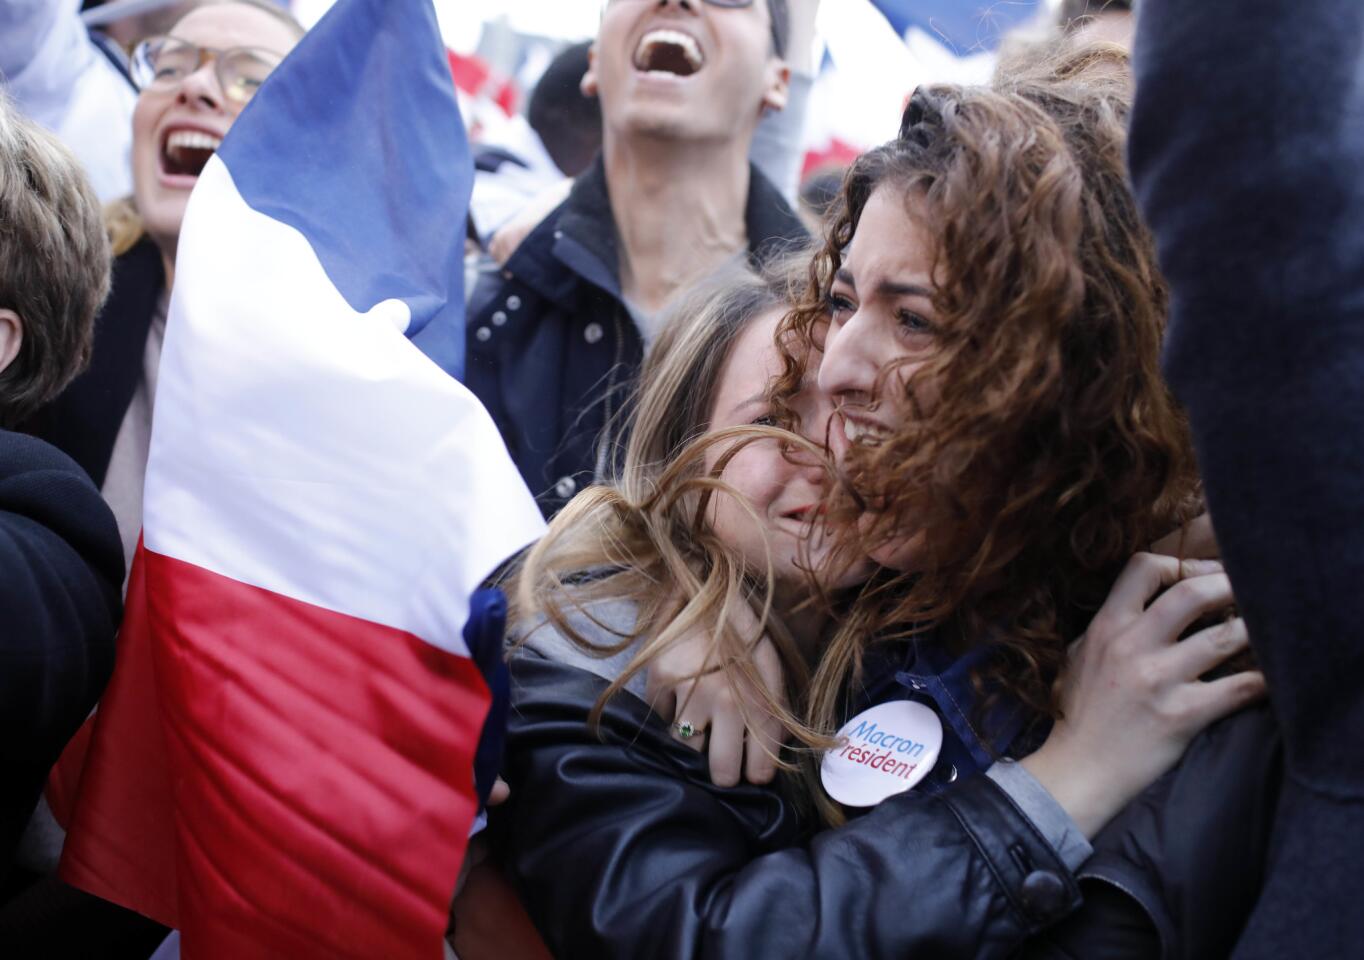 Supporters of French independent centrist presidential candidate, Emmanuel Macron react outside the Louvre museum in Paris, France, Sunday, May 7, 2017. Polling agencies have projected that centrist Emmanuel Macron will be France's next president, putting a 39-year-old political novice at the helm of one of the world's biggest economies and slowing a global populist wave. The agencies projected that Macron defeated far-right leader Marine Le Pen 65 percent to 35 percent on Sunday.